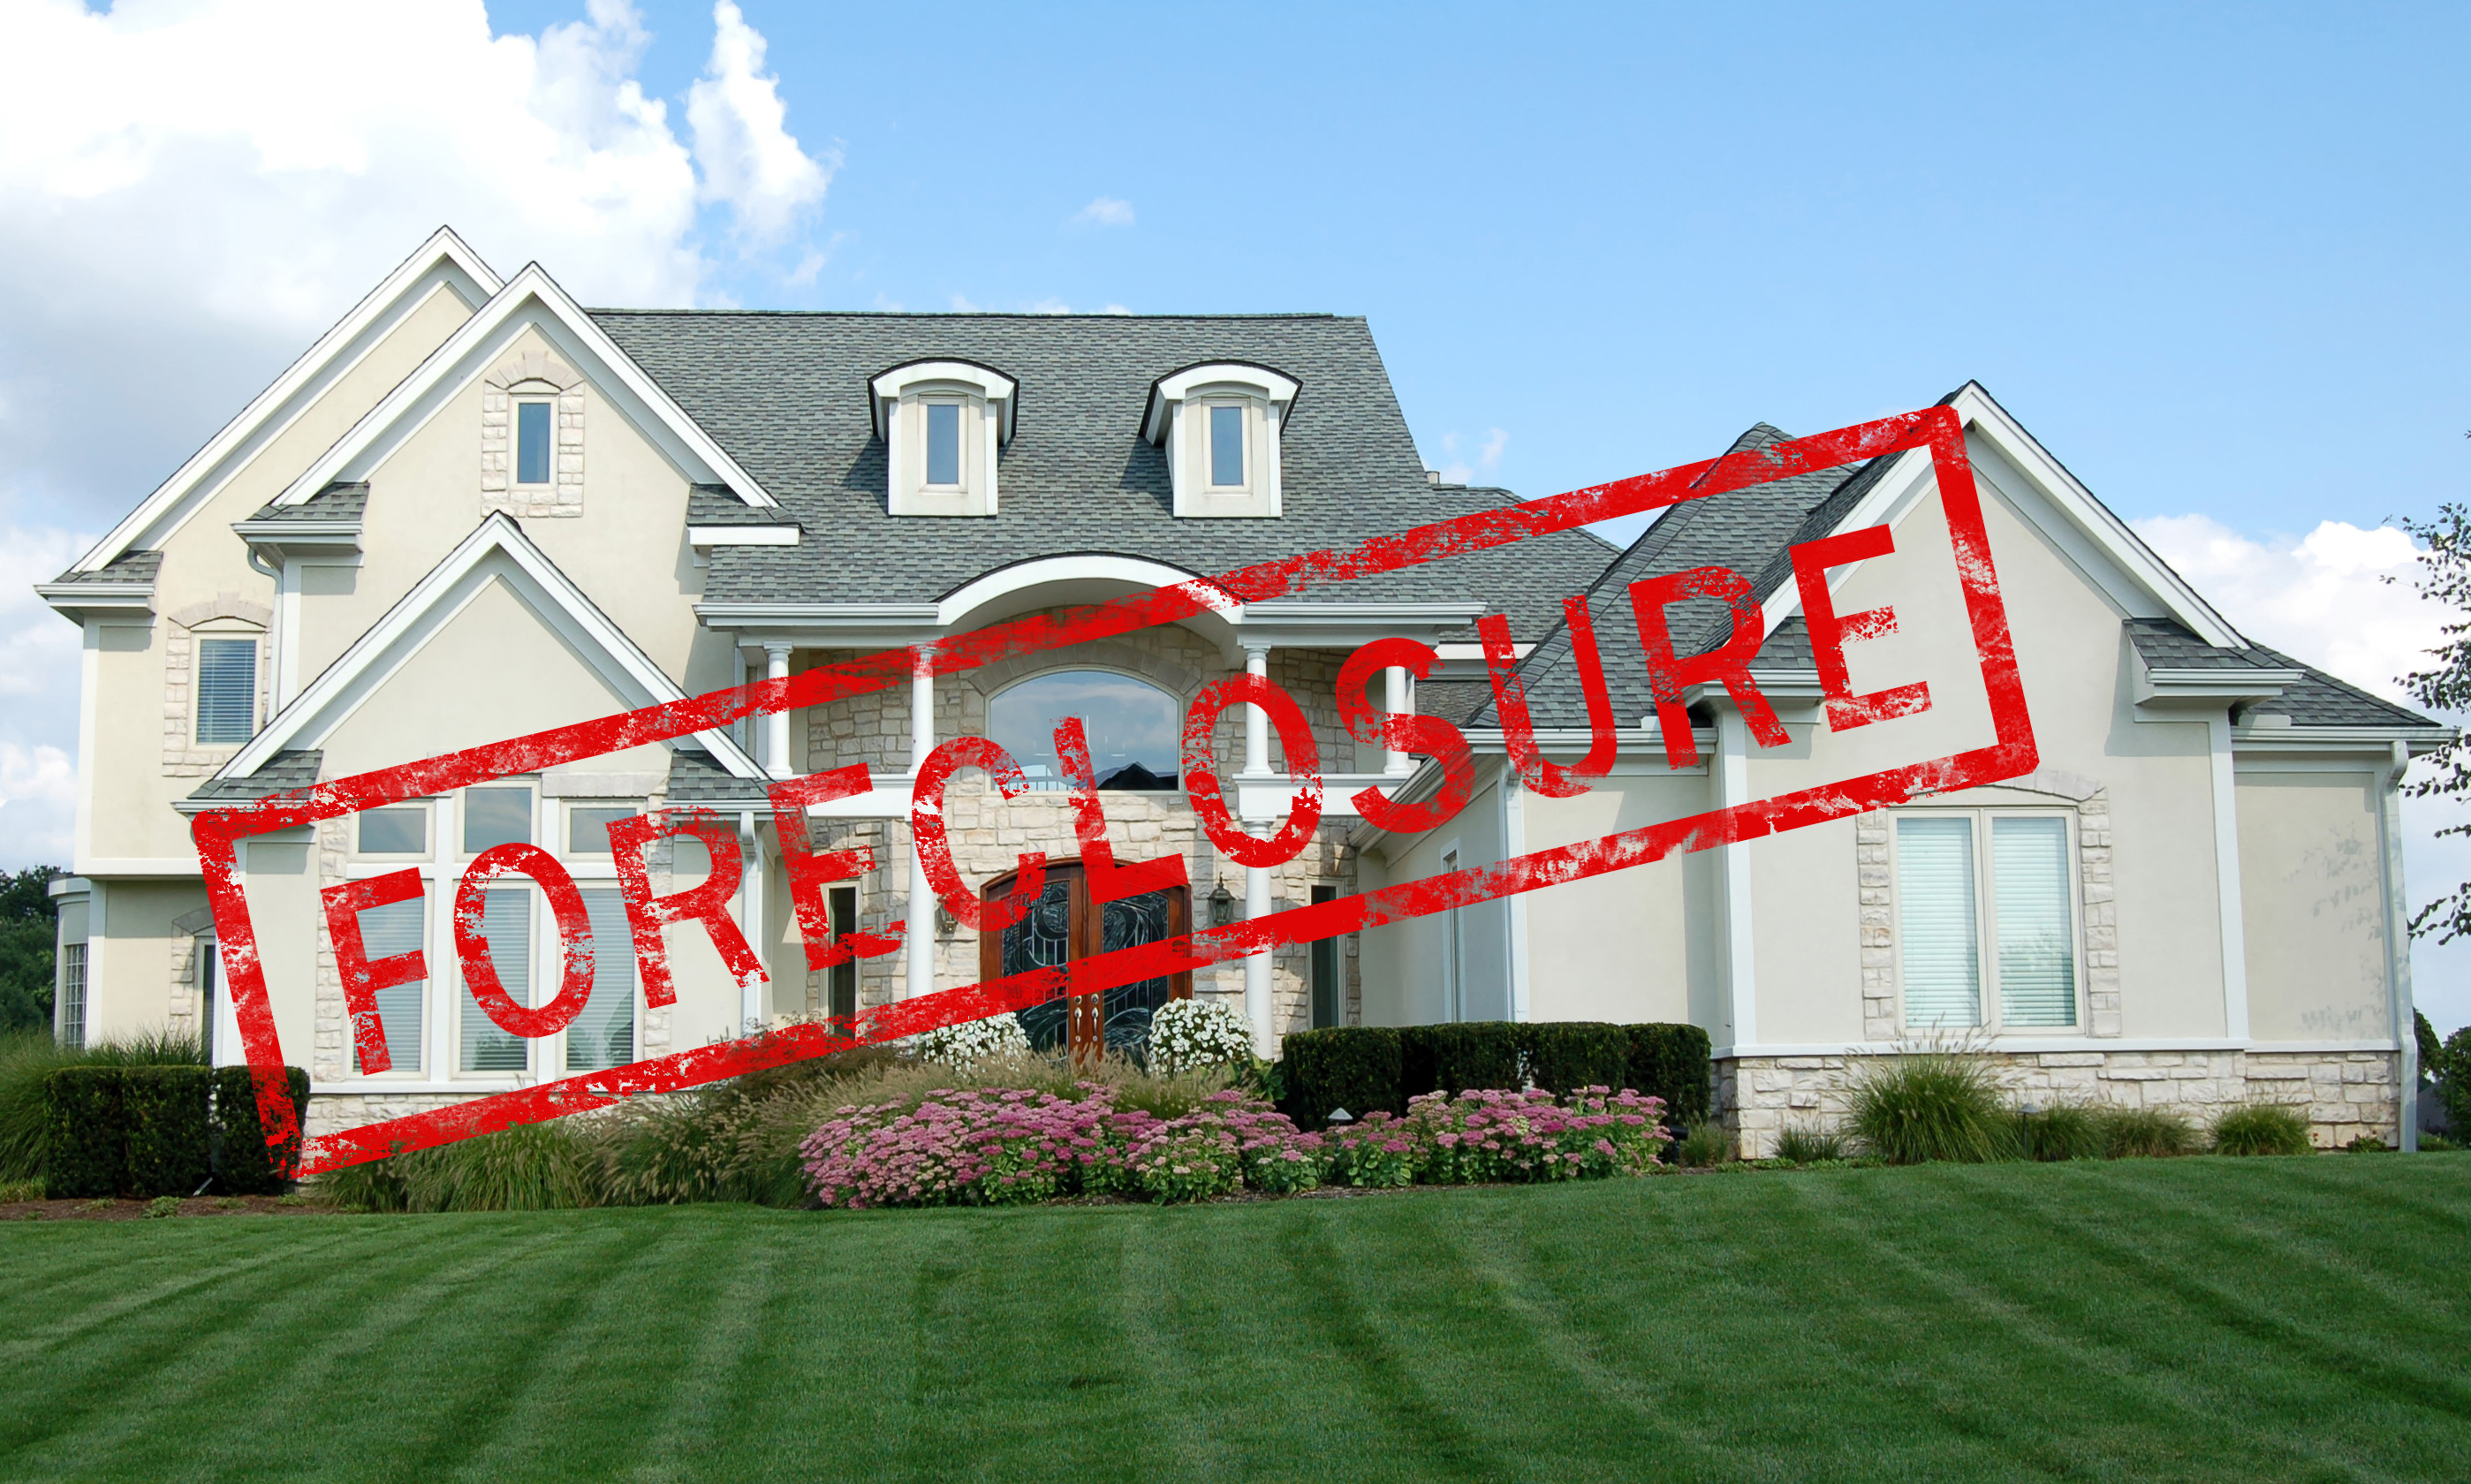 Call Severson Appraisal Service when you need valuations regarding Anchorage foreclosures